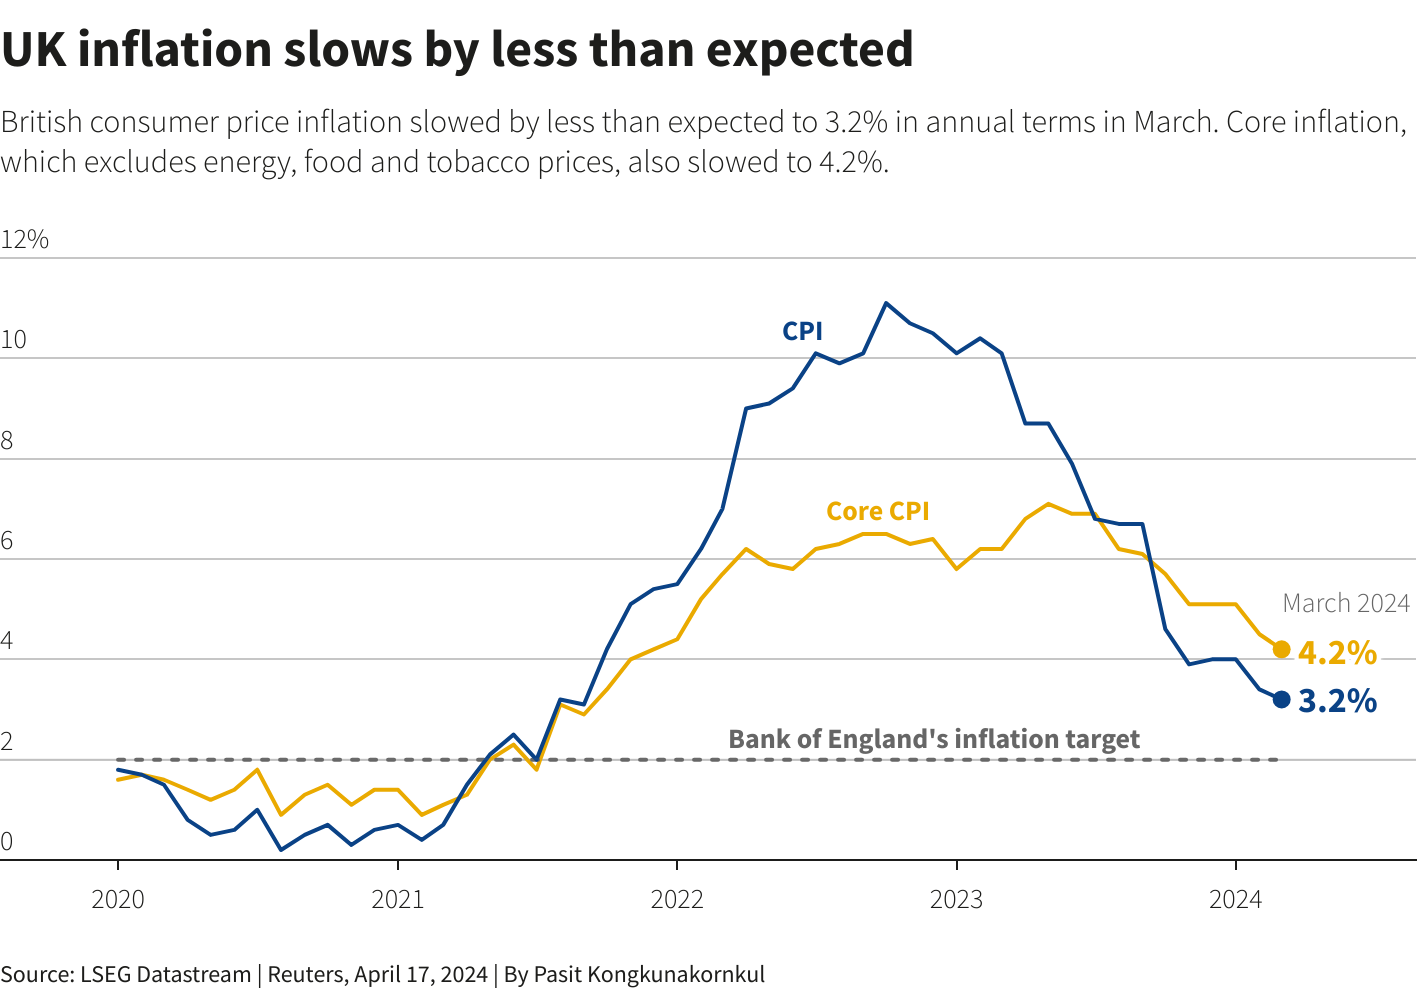 UK inflation chart by reuters